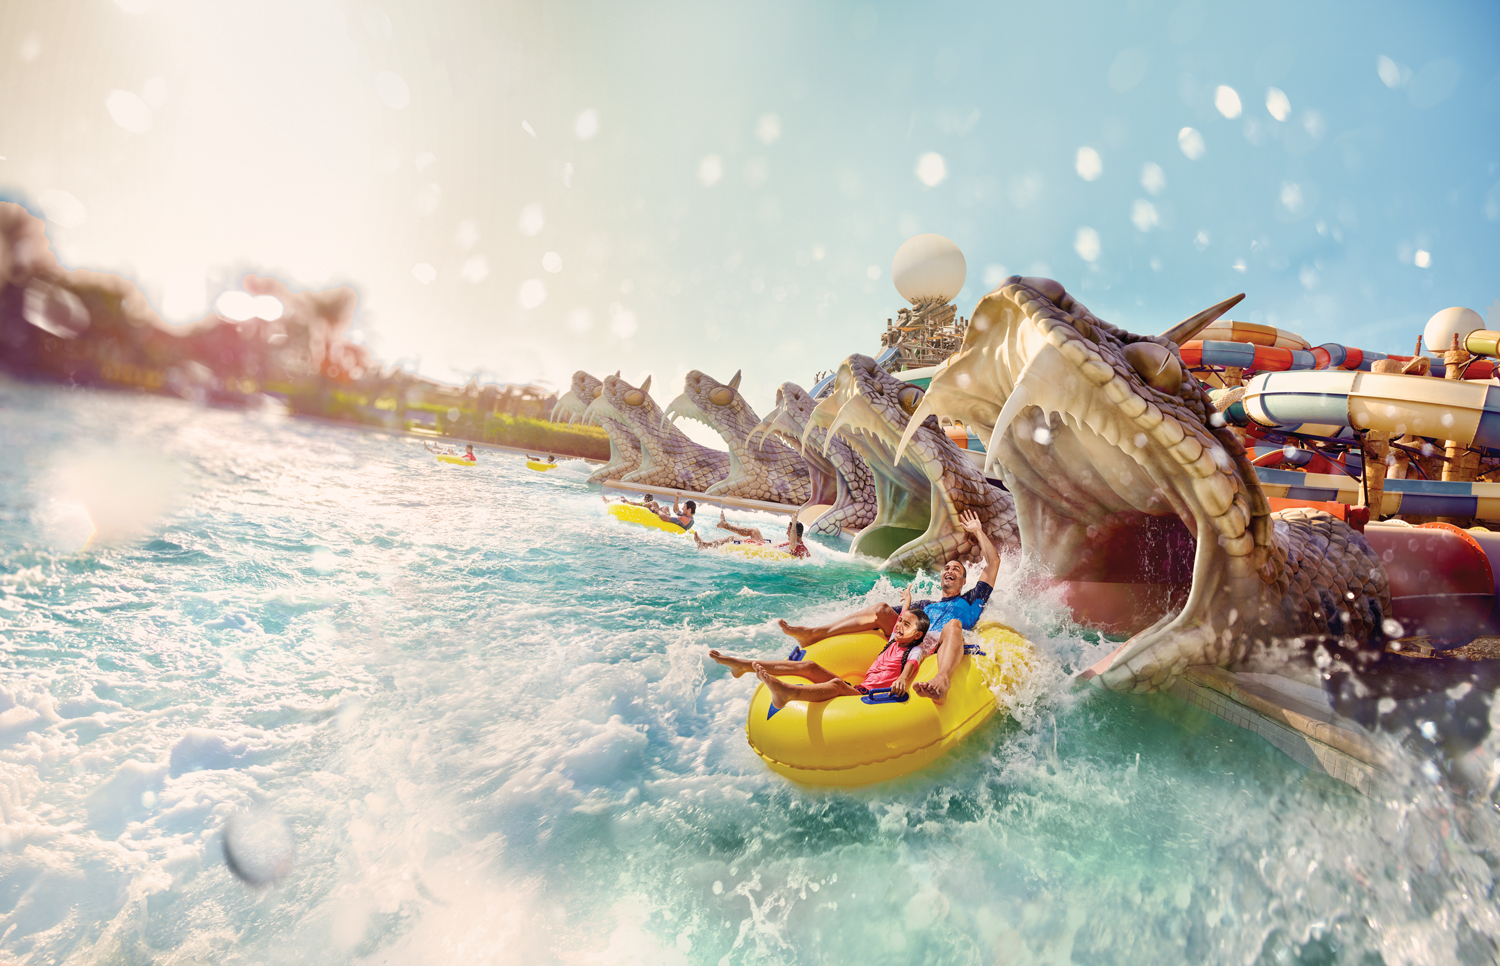 Feel The Rush This Race Weekend With These Adrenaline-Pumping Rides At Yas Waterworld